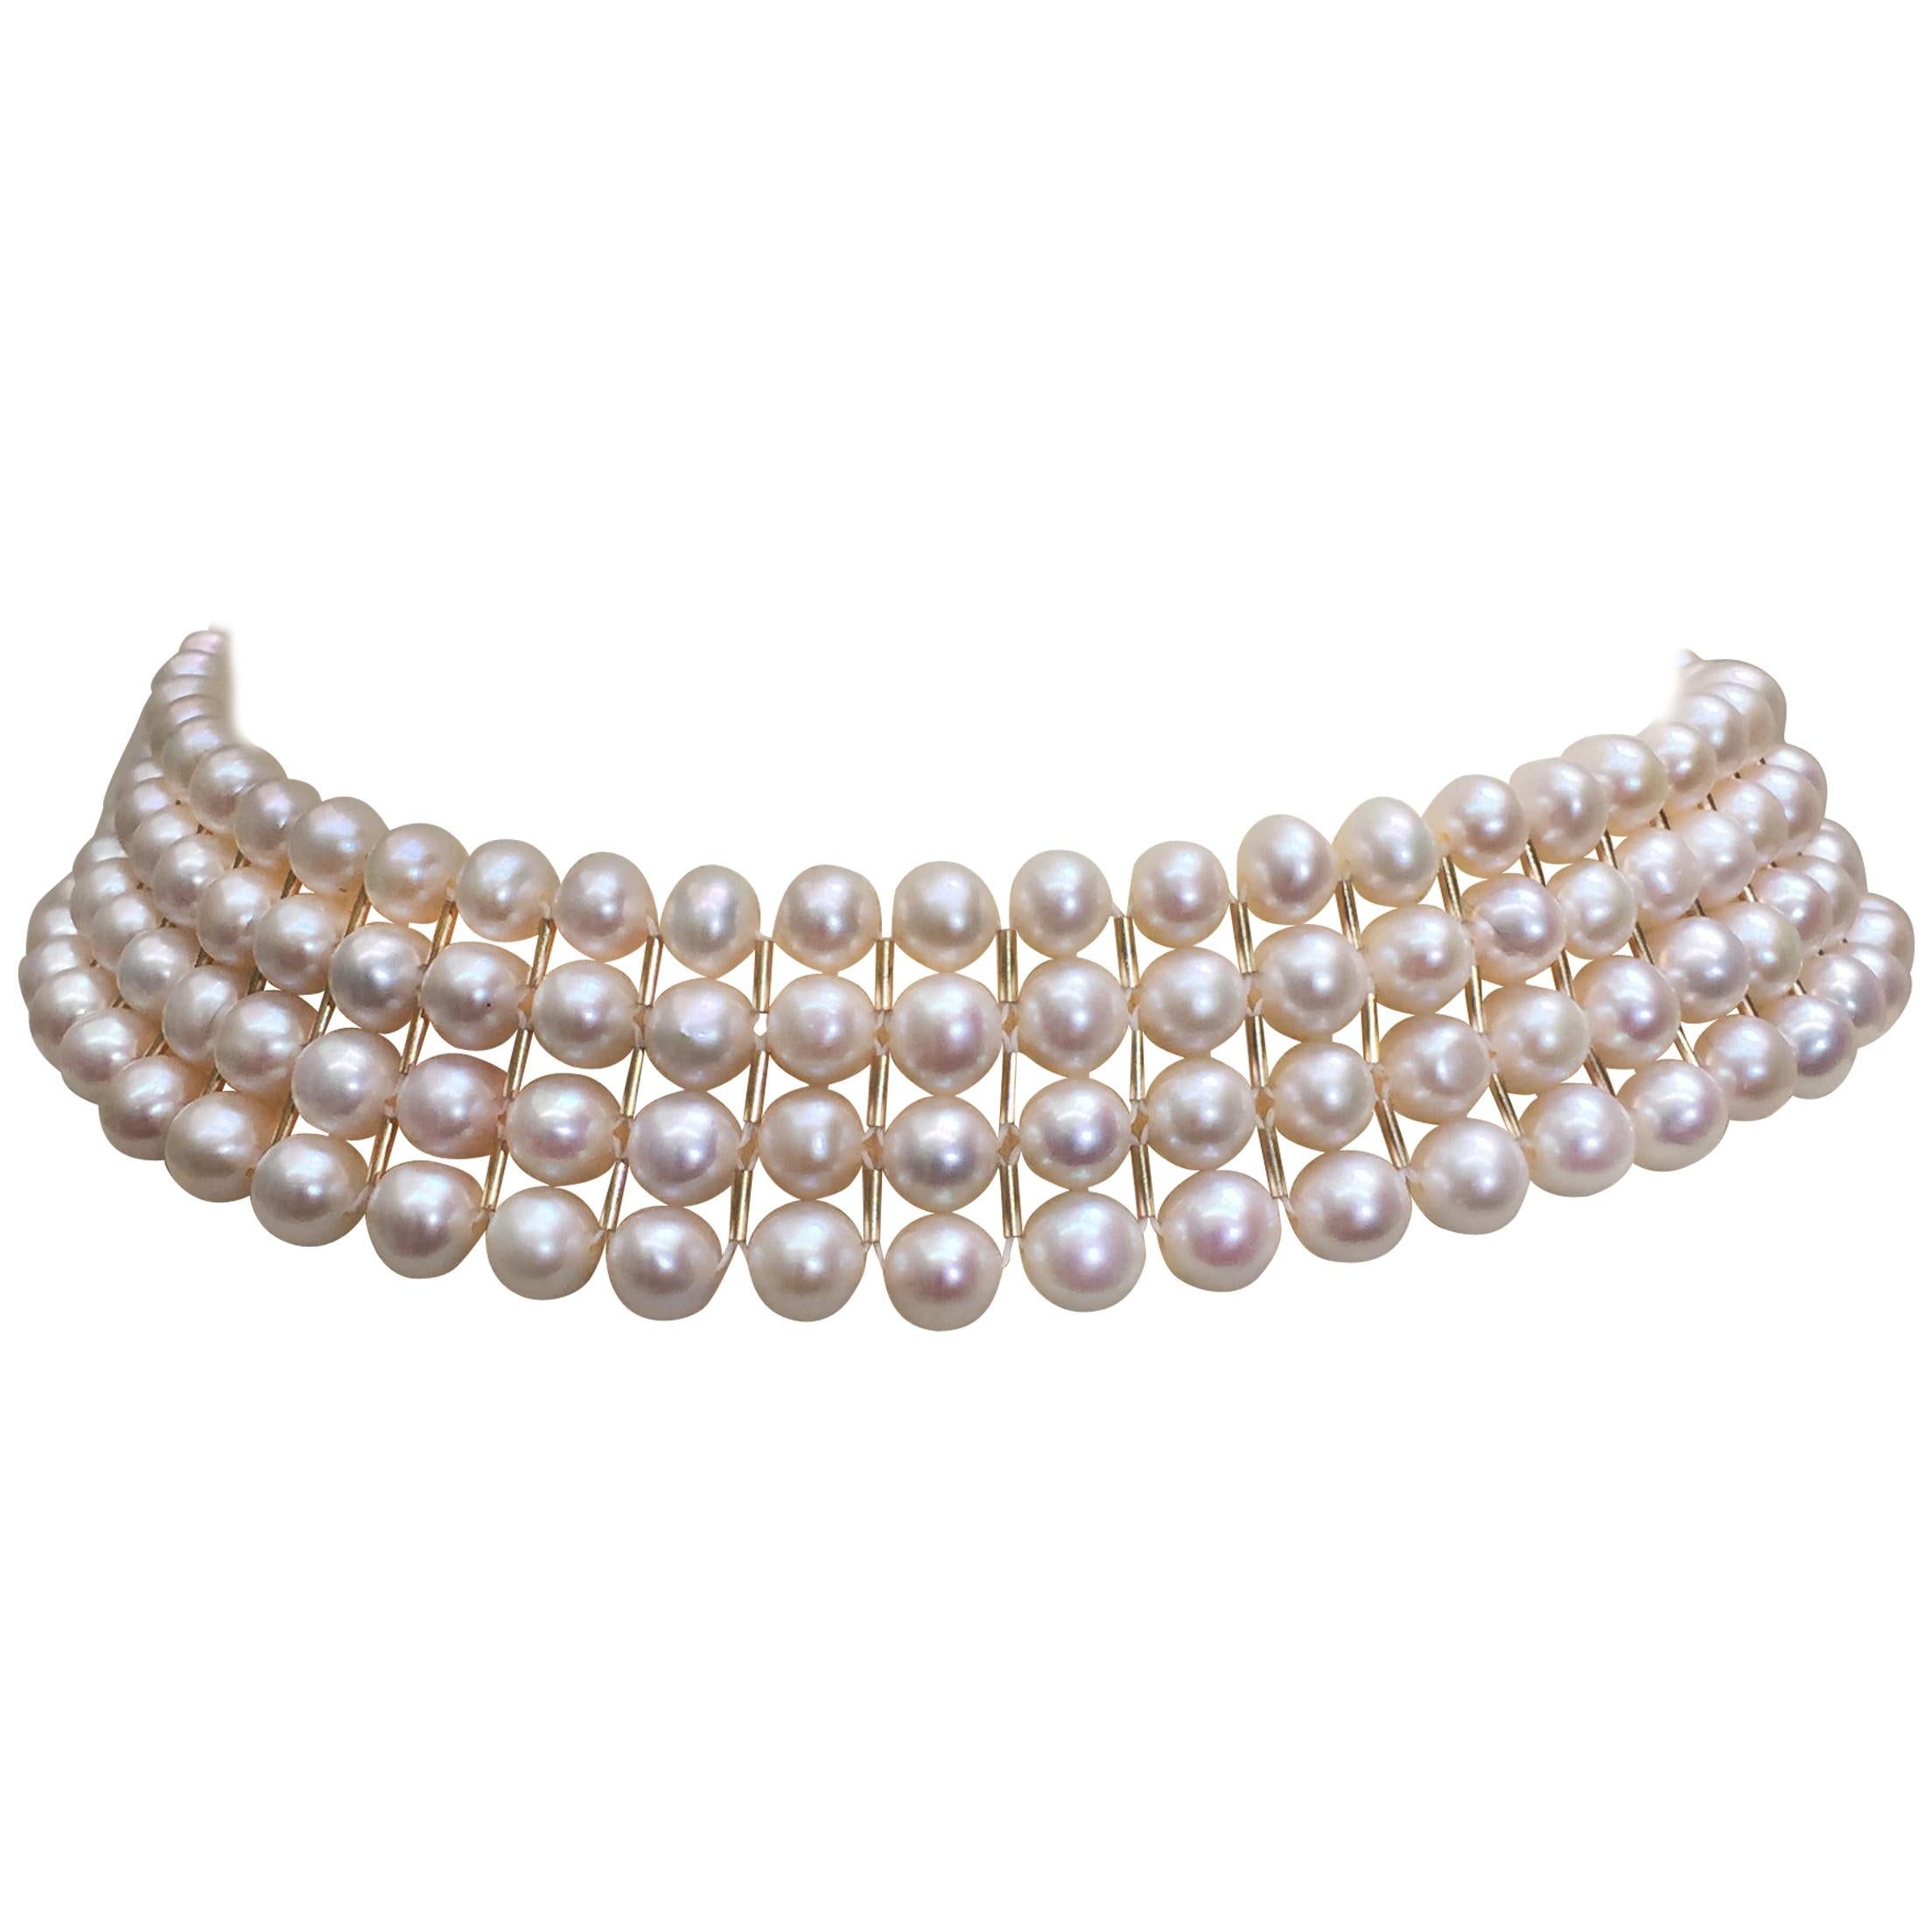 Marina J Bridal Woven White Pearl Choker with secure sliding clasp